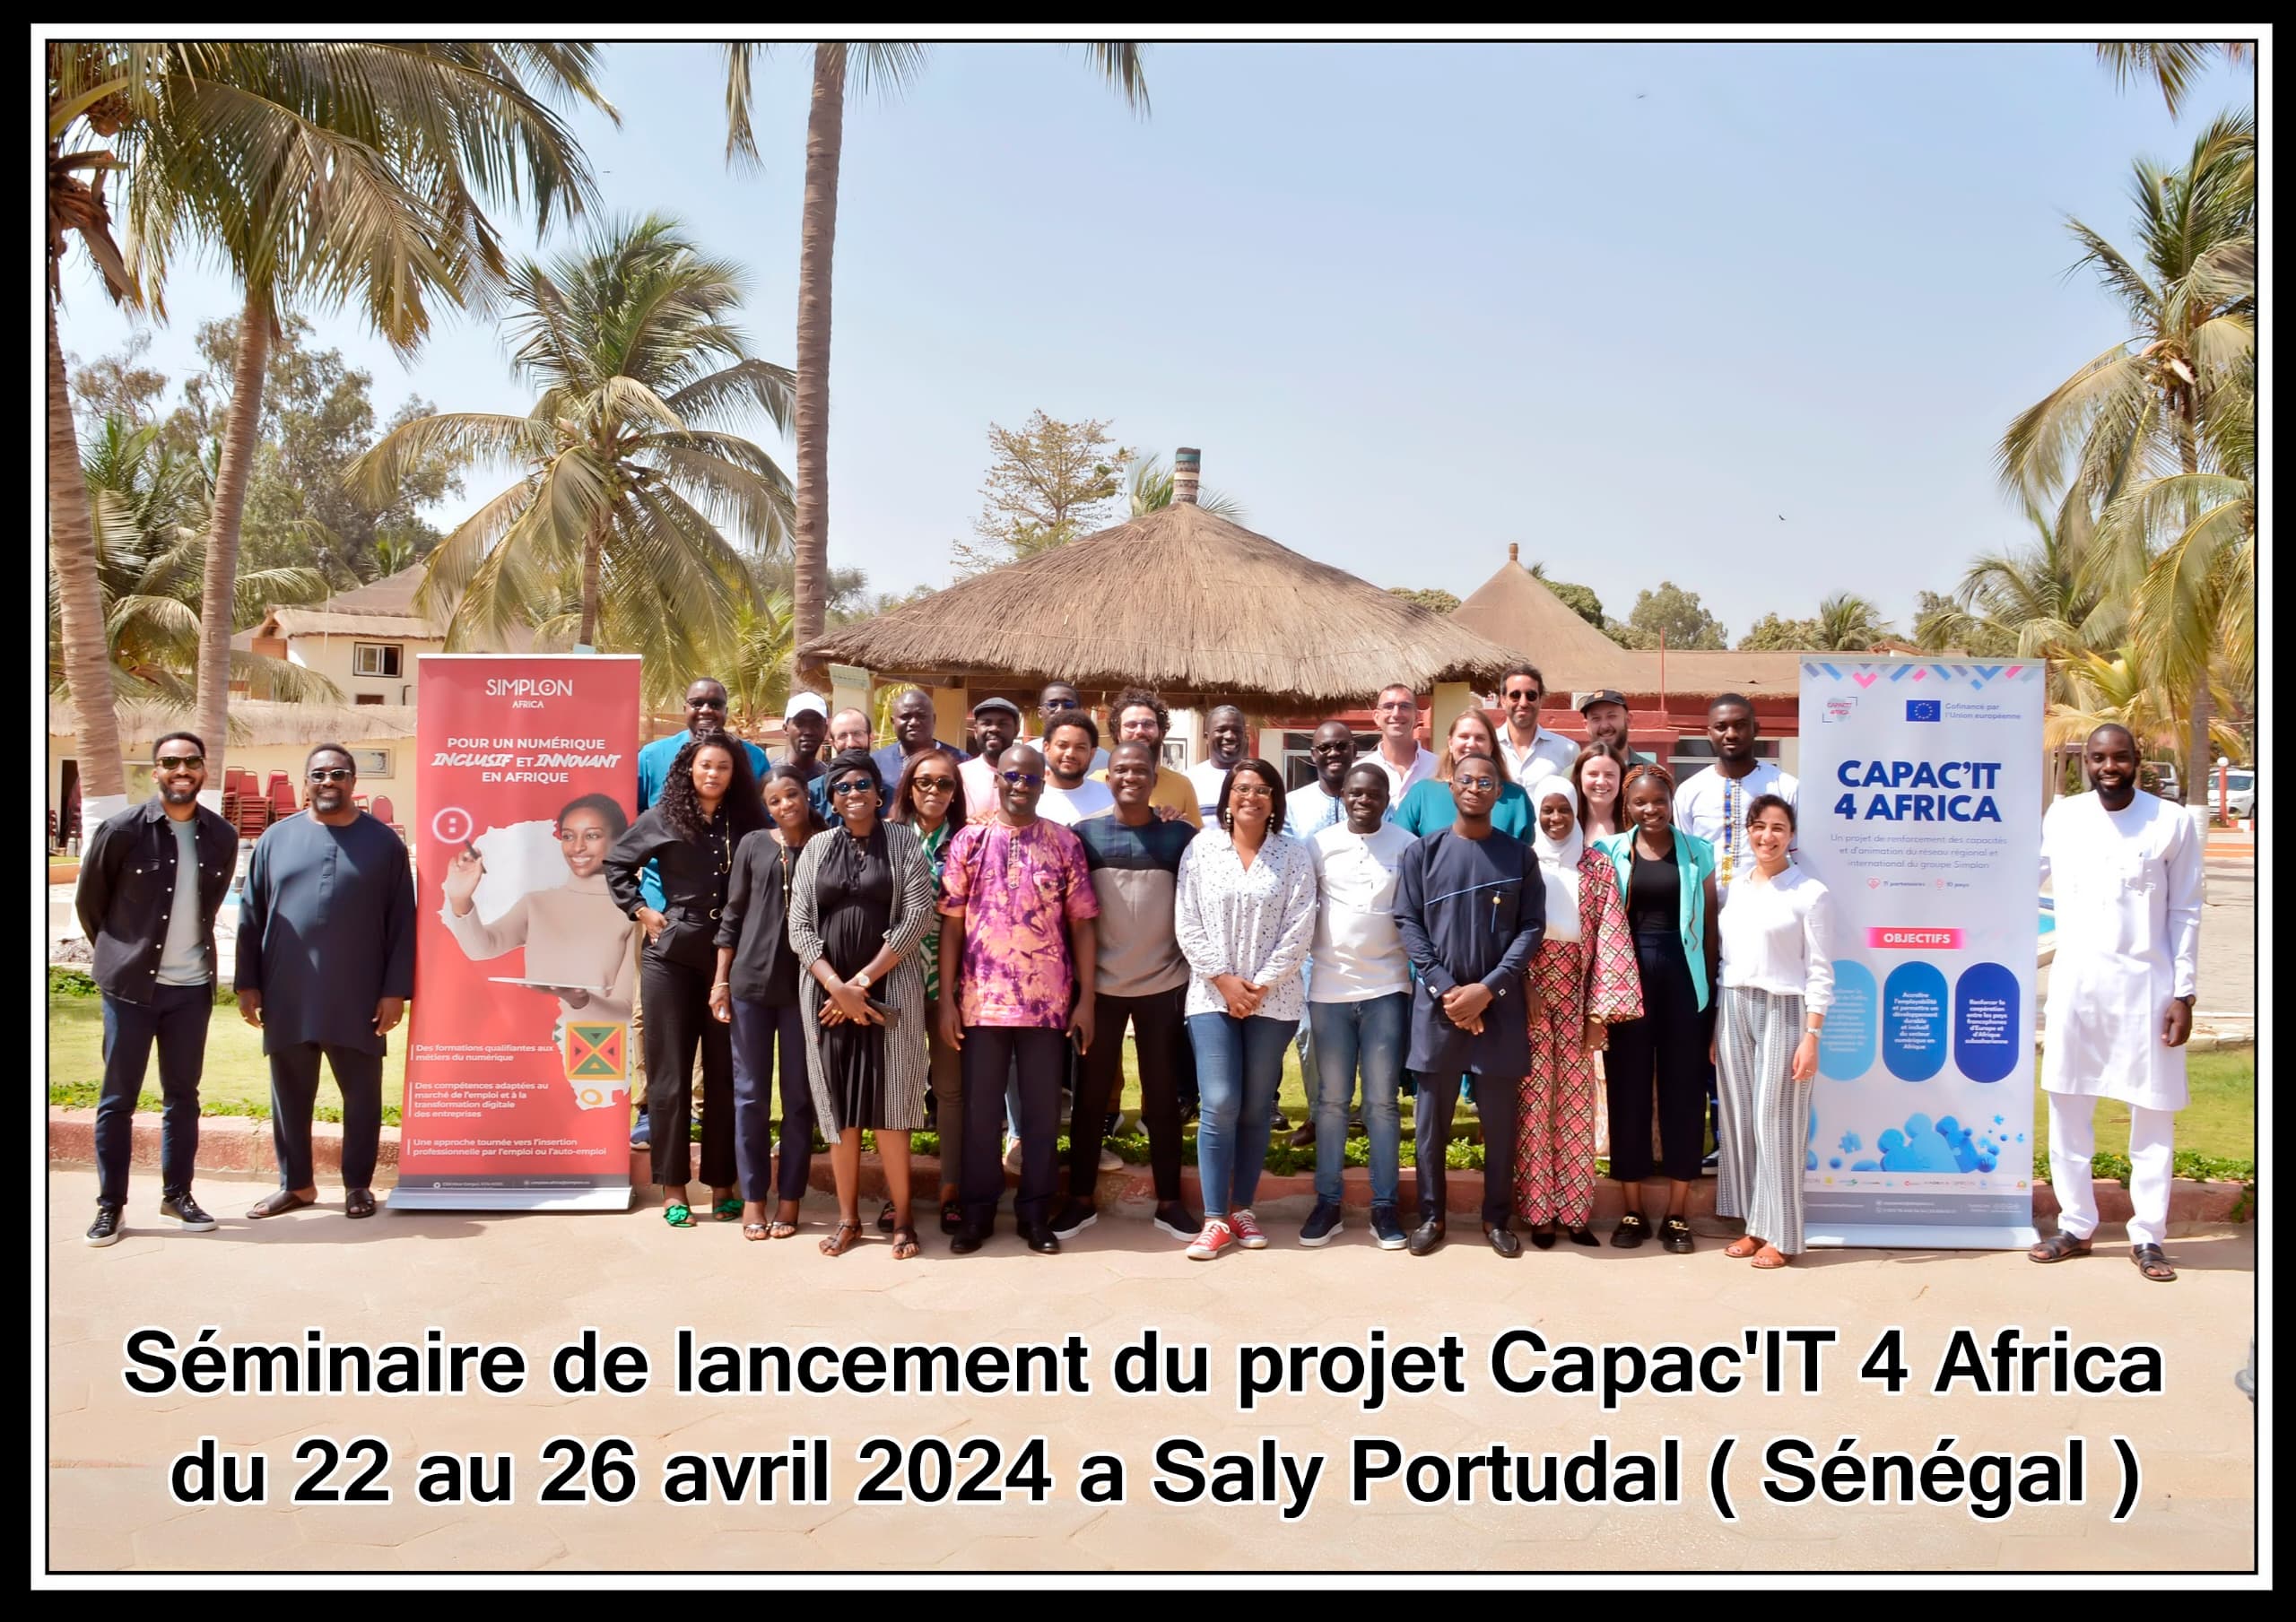 Le projet Capac’IT 4 Africa